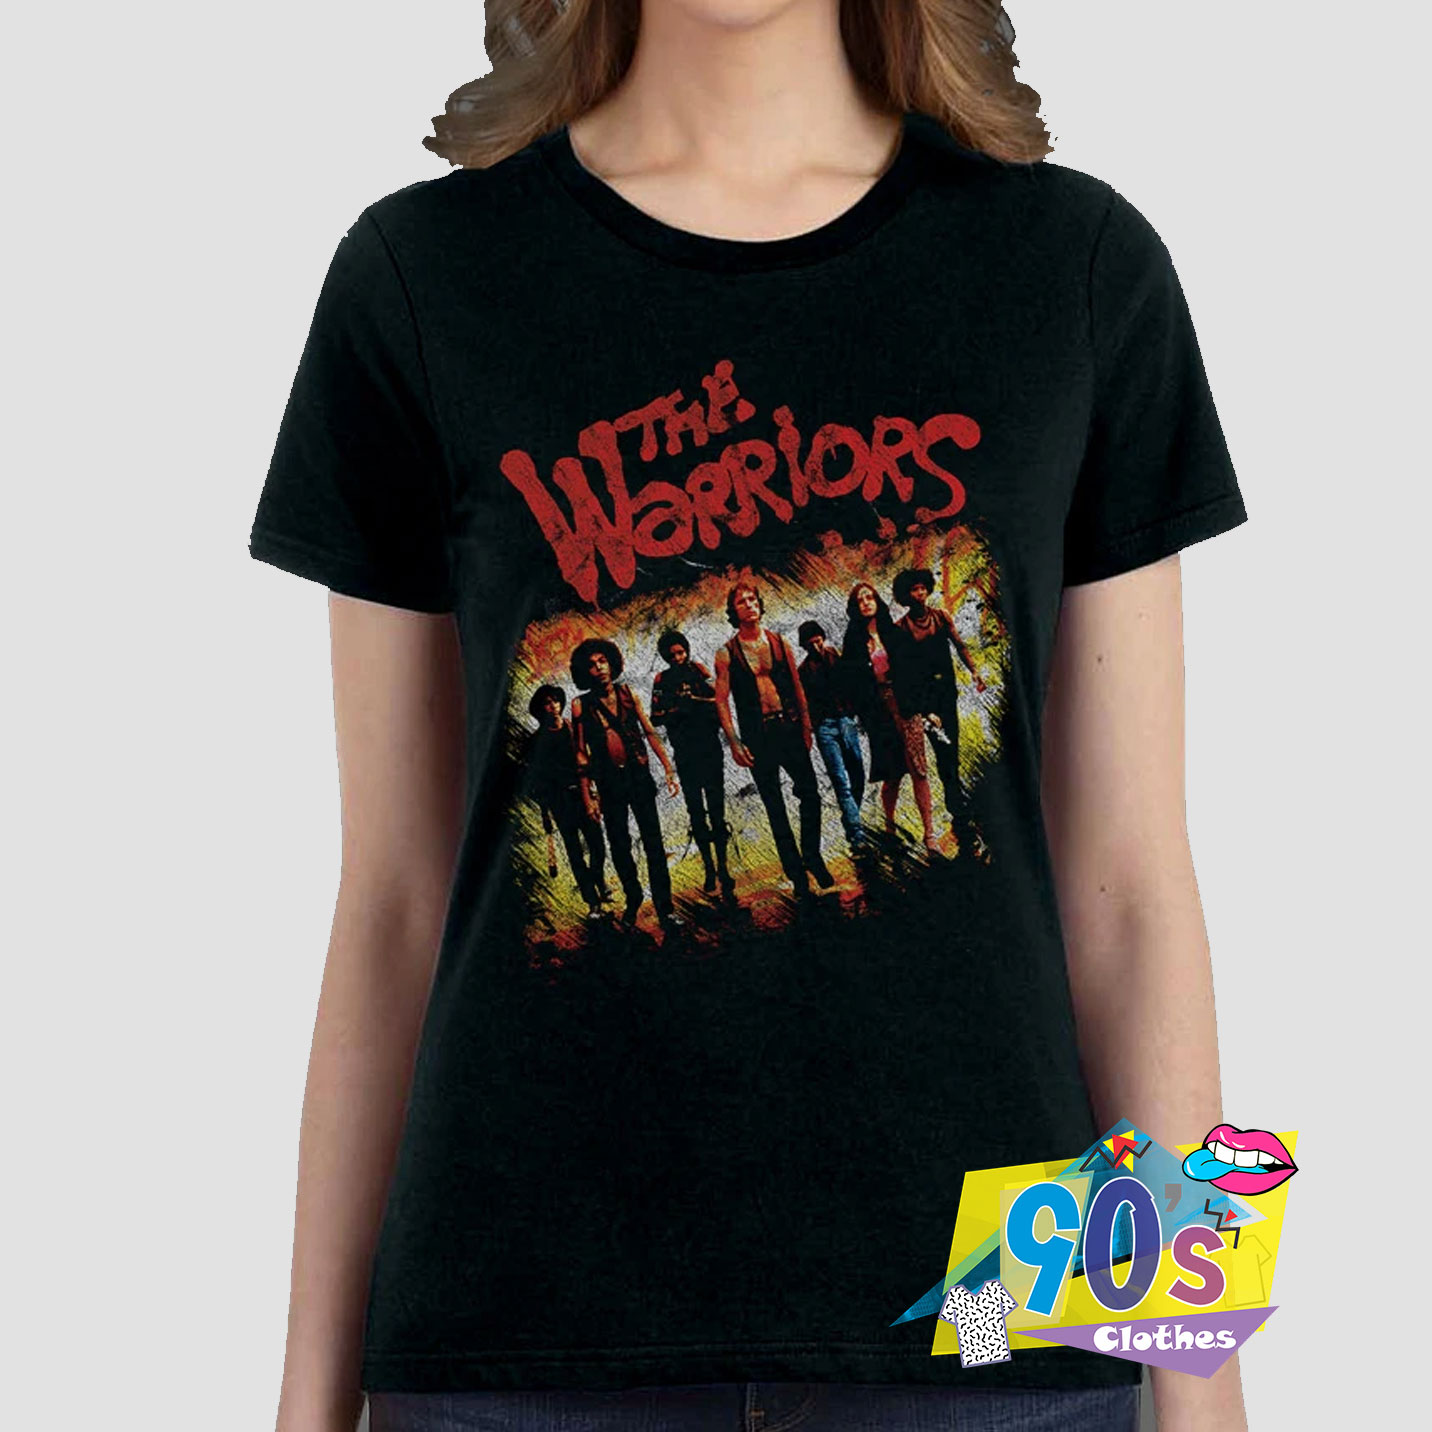 Official The Warriors Classic T Shirt On Sale - 90sclothes.com